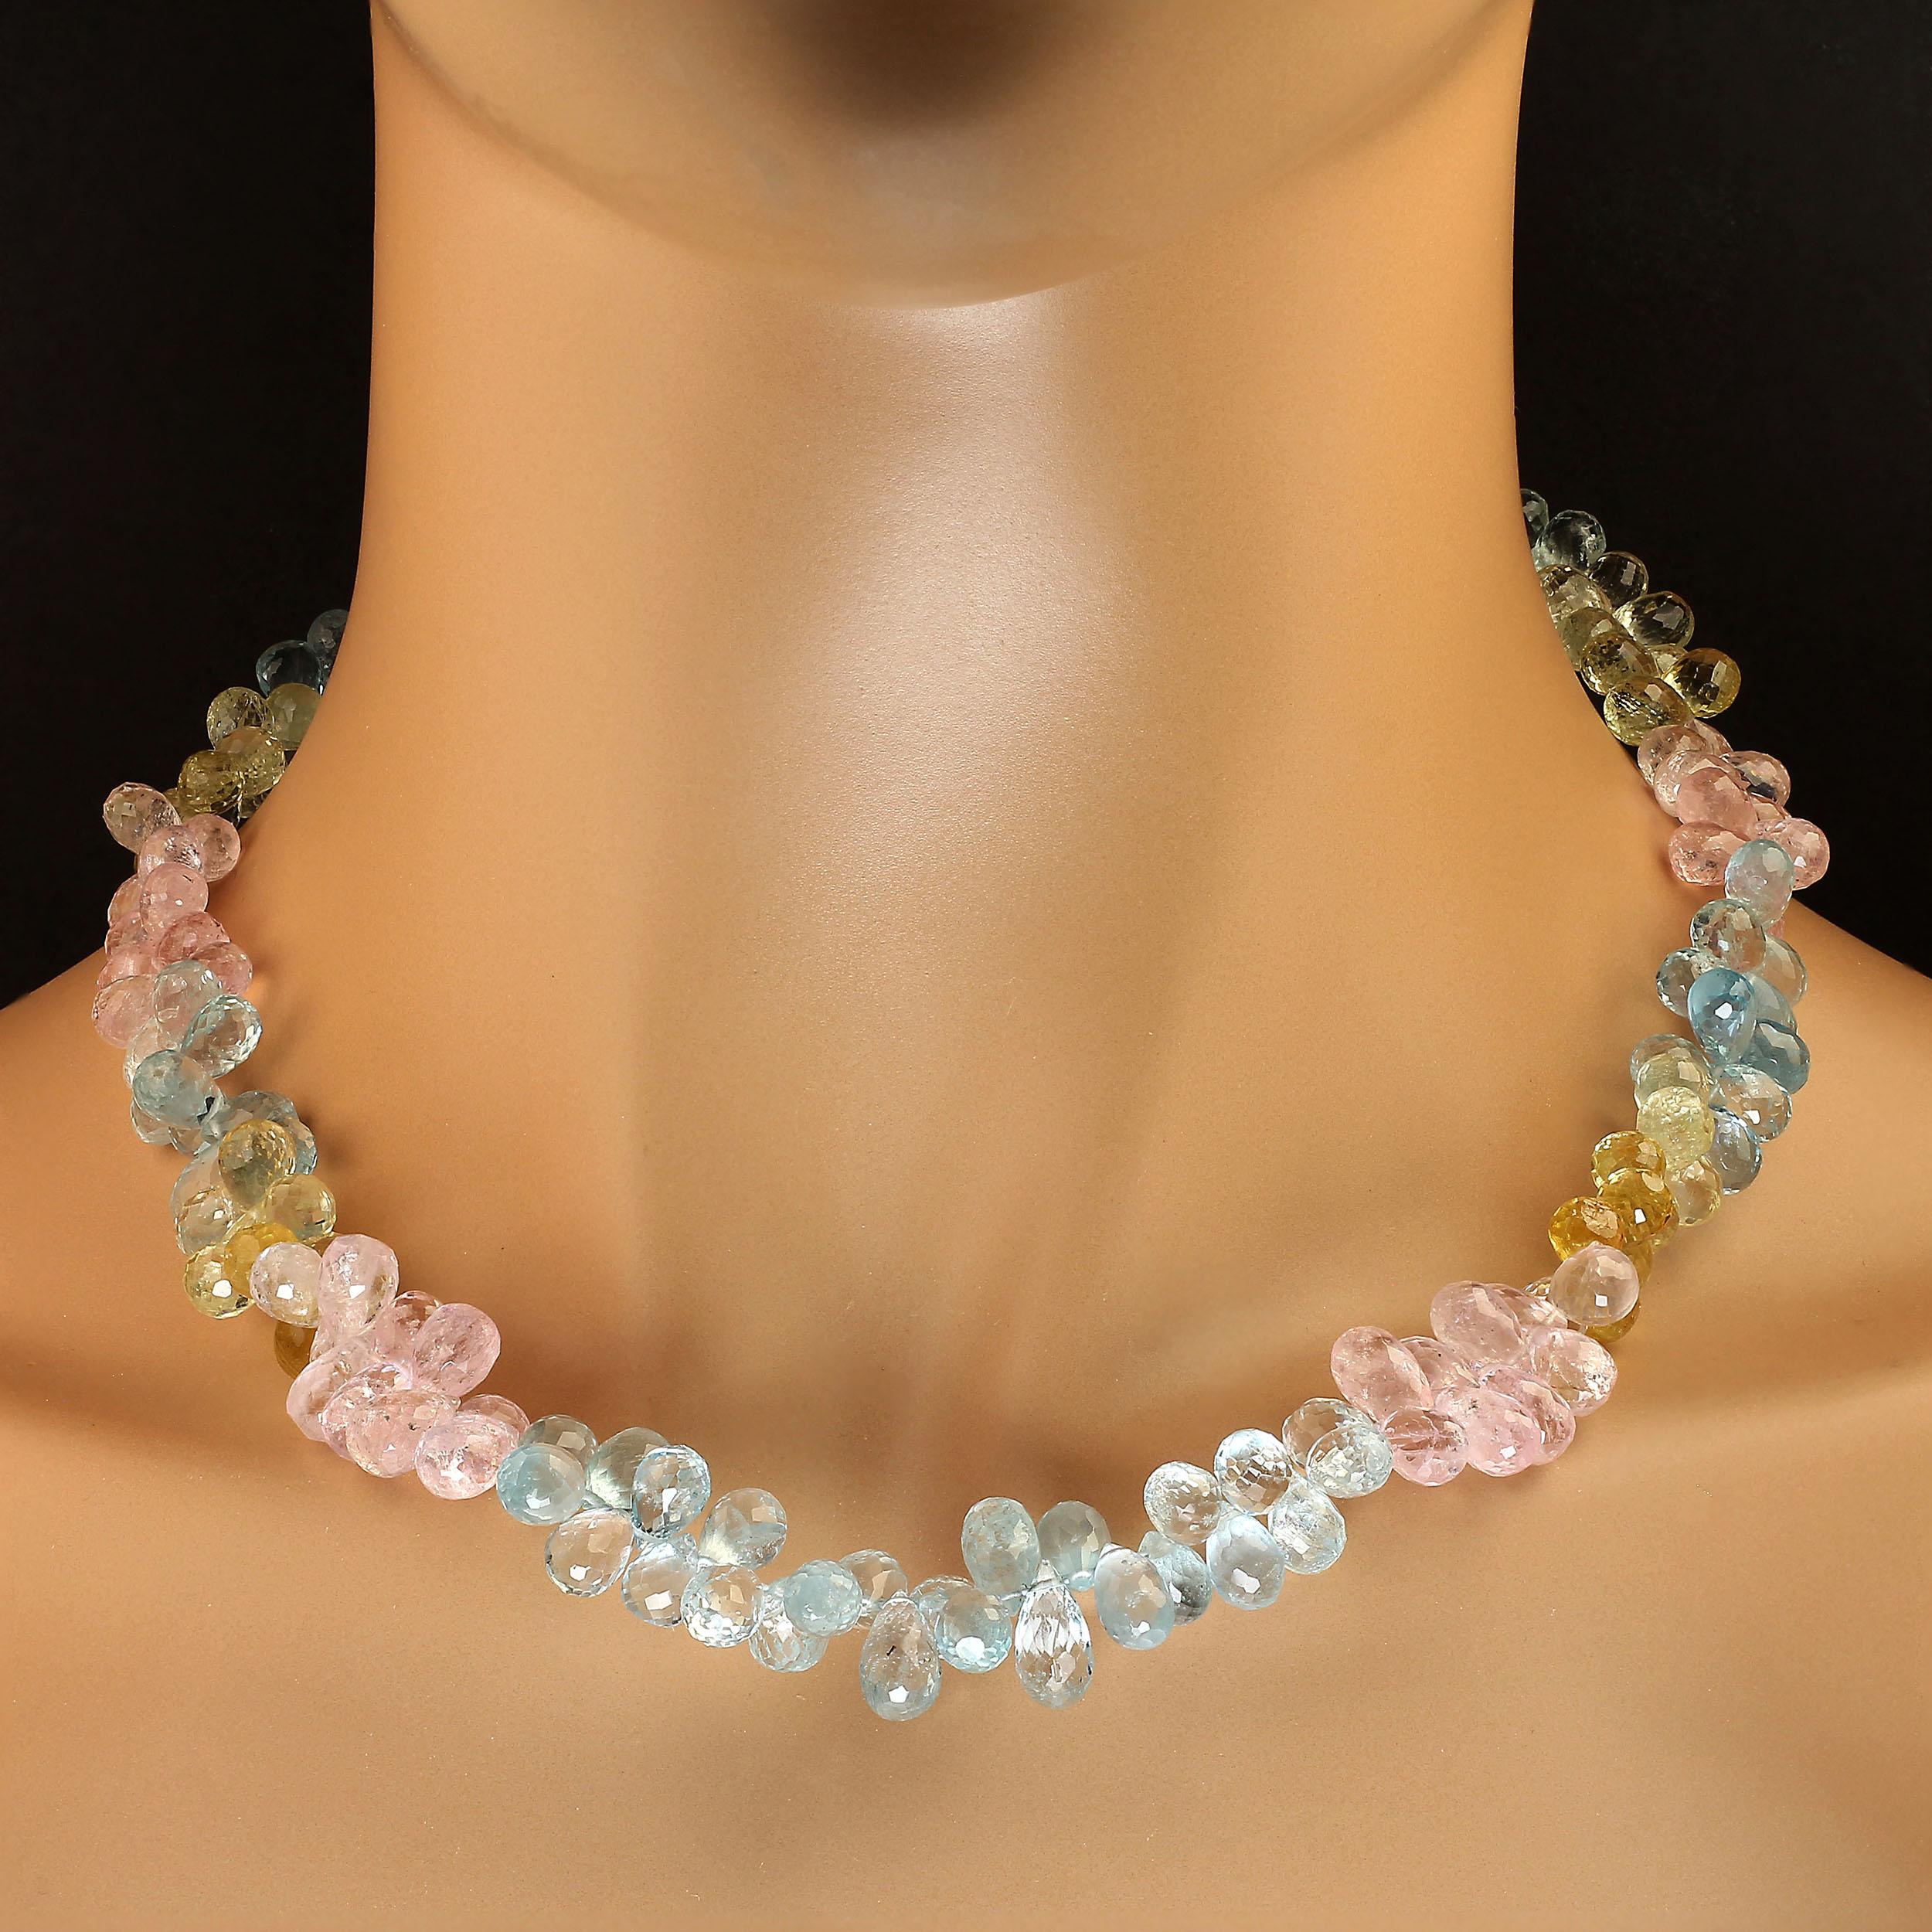 One of a kind Multi Color Beryl necklace in faceted briolettes. This gorgeous collar is so sparkling and fun to wear it will be your 'go to' necklace for cocktails and dinner. These 10 X 8 MM Beryls include pink, yellow, clear, and blue. At 19